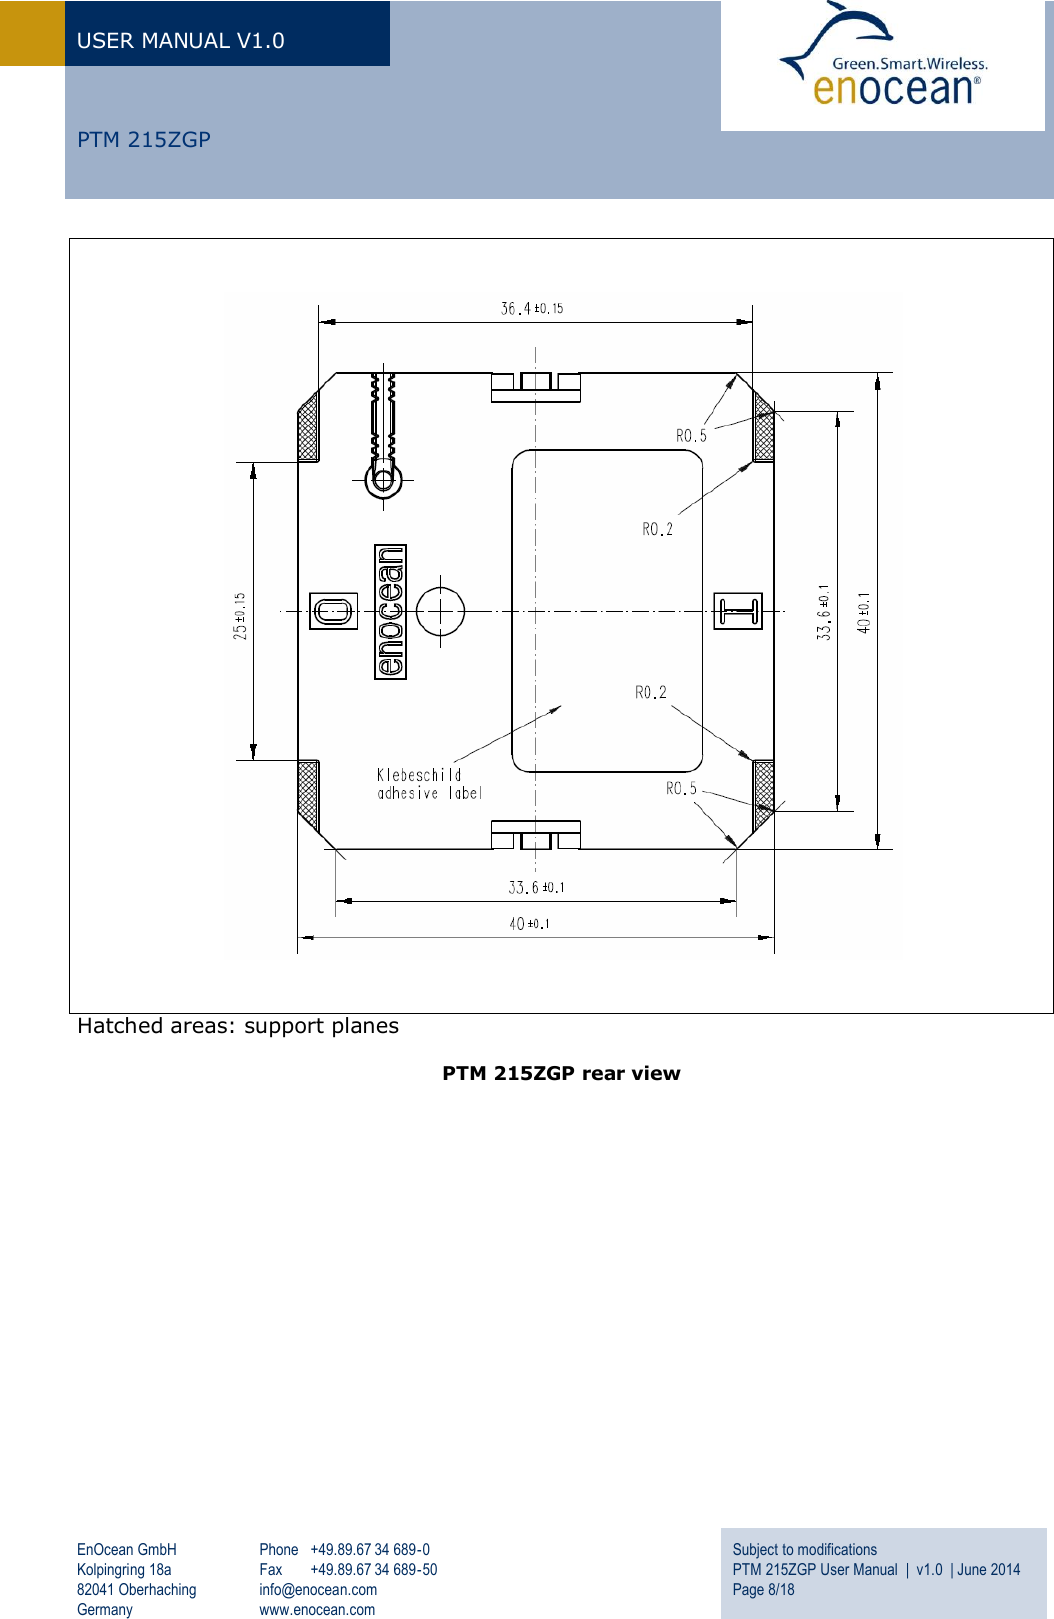 USER MANUAL V1.0   EnOcean GmbH Kolpingring 18a 82041 Oberhaching Germany Phone  +49.89.67 34 689-0 Fax  +49.89.67 34 689-50 info@enocean.com www.enocean.com Subject to modifications PTM 215ZGP User Manual  |  v1.0  | June 2014 Page 8/18      PTM 215ZGP    Hatched areas: support planes  PTM 215ZGP rear view     